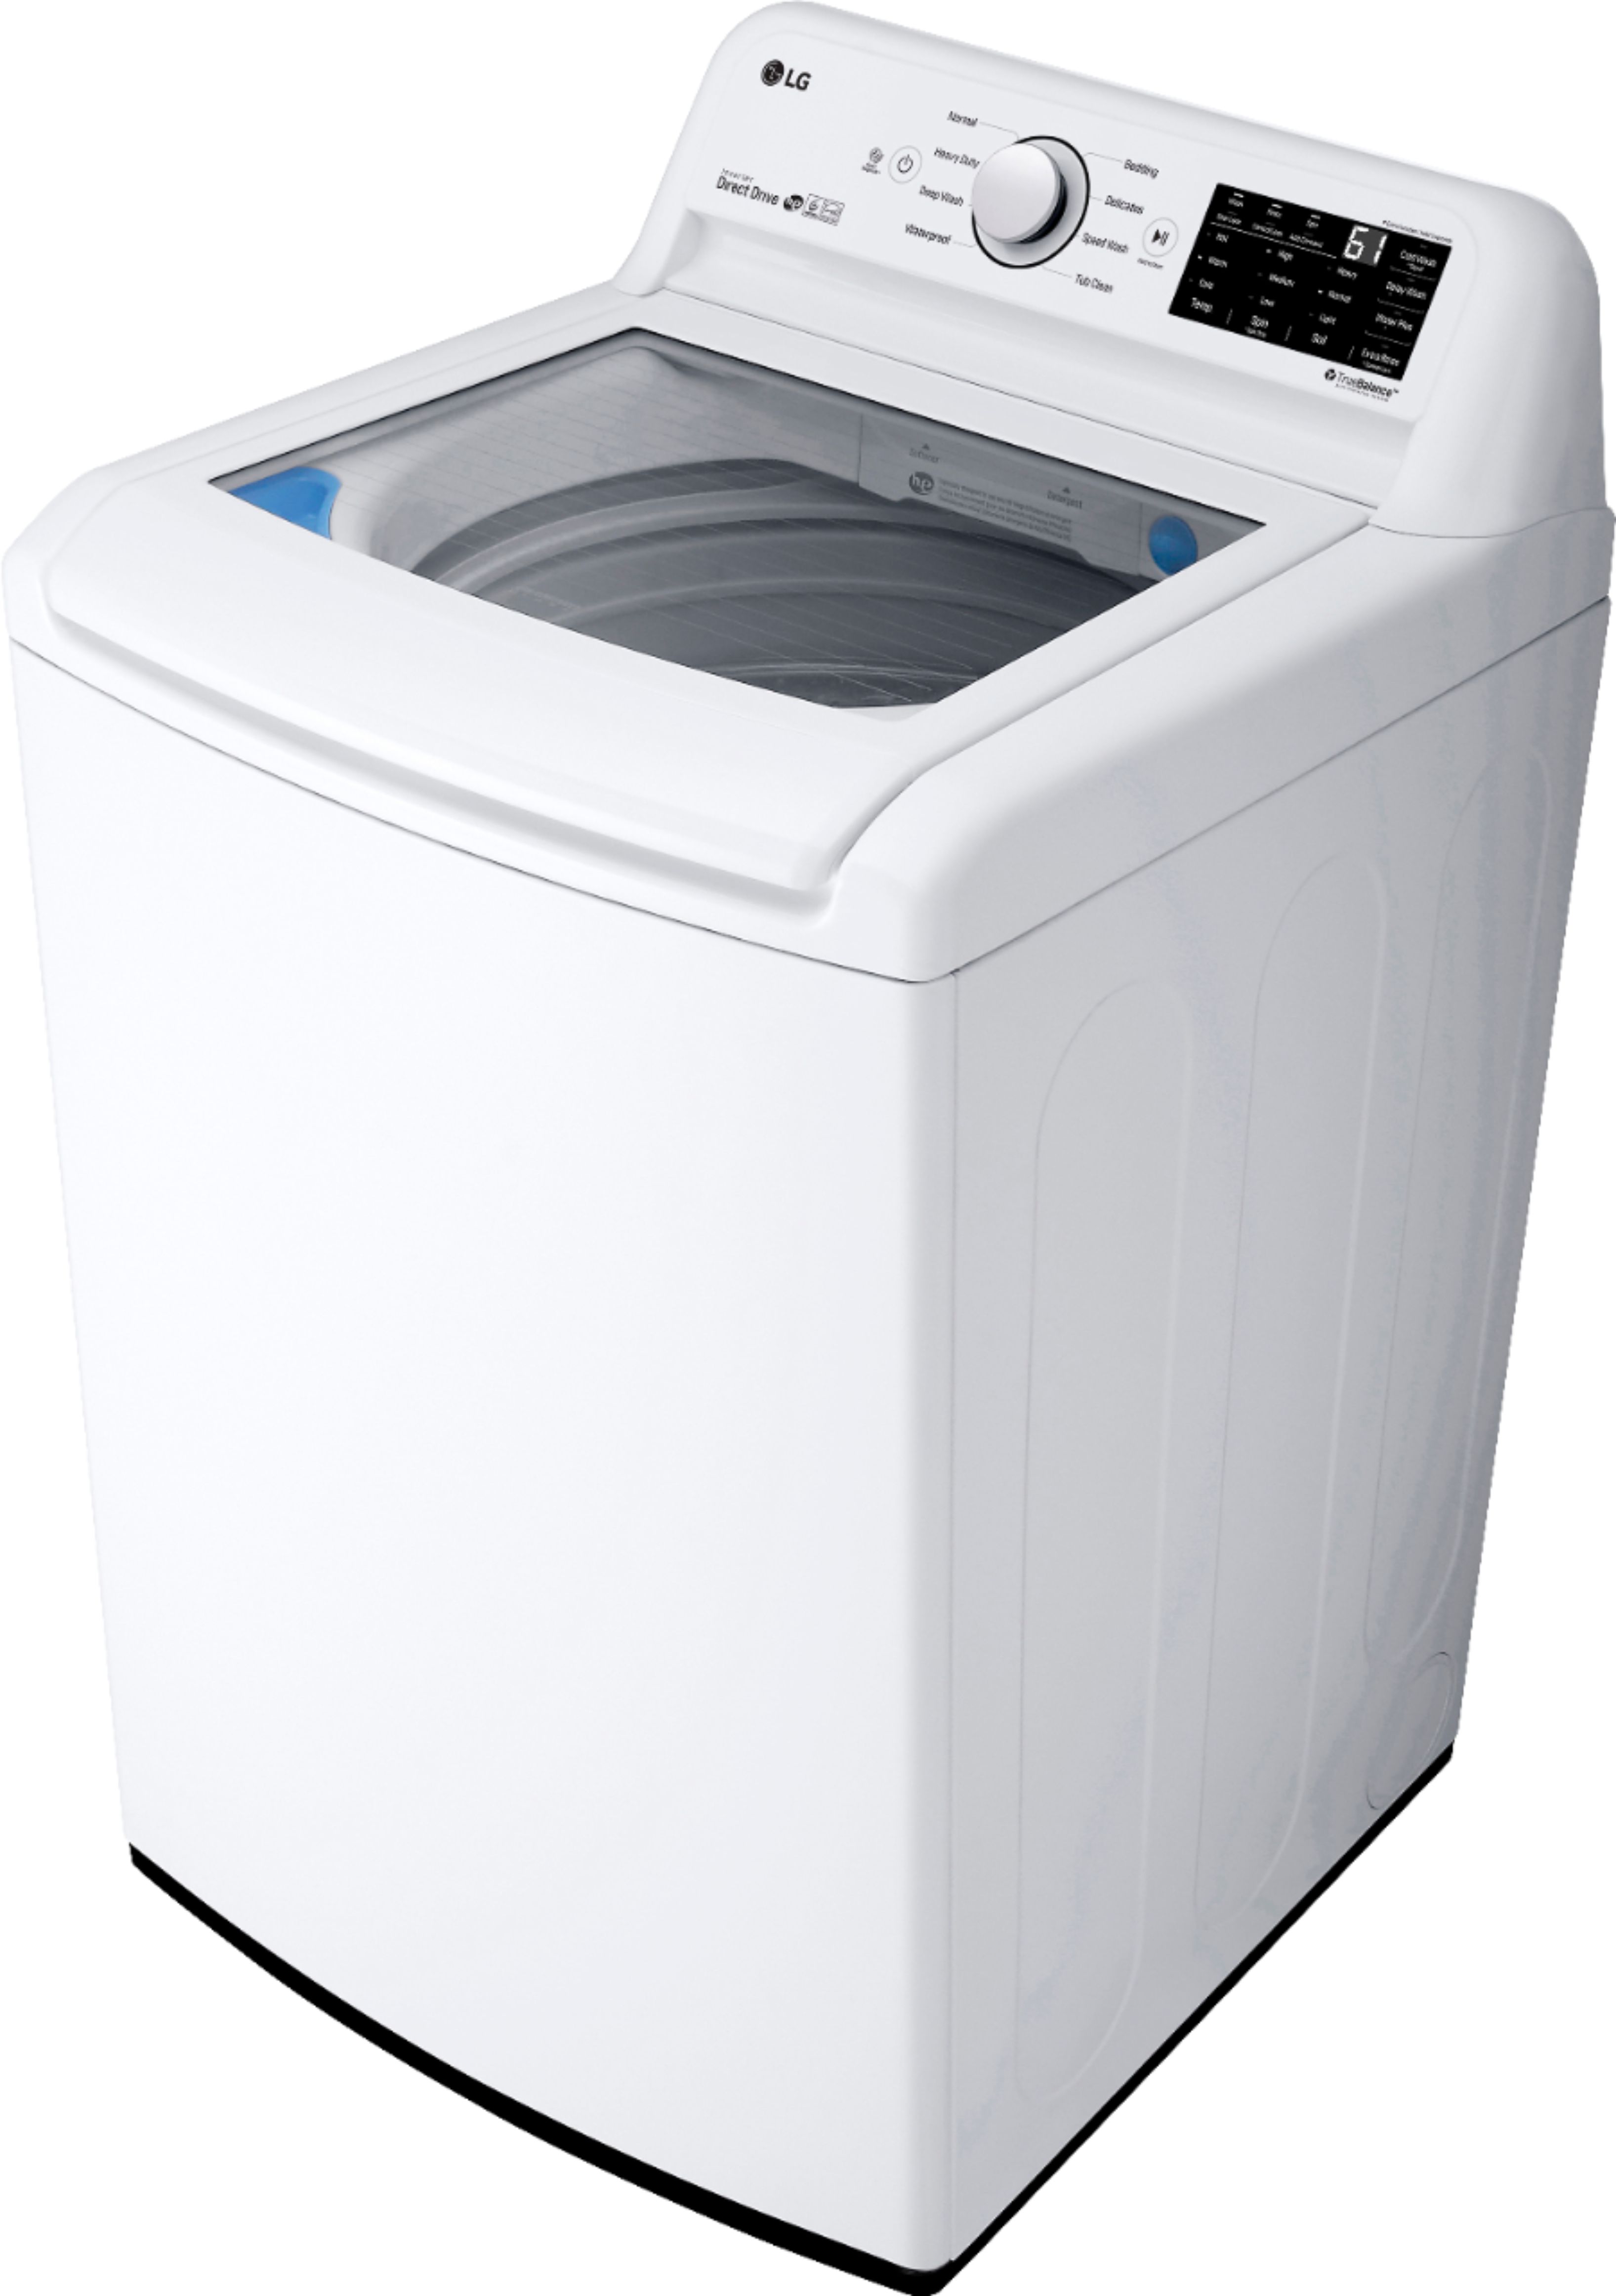 Left View: Samsung - 4.1 cu. ft. High-Efficiency Top Load Washer with Soft-Close Lid and 8 Washing Cycles - White